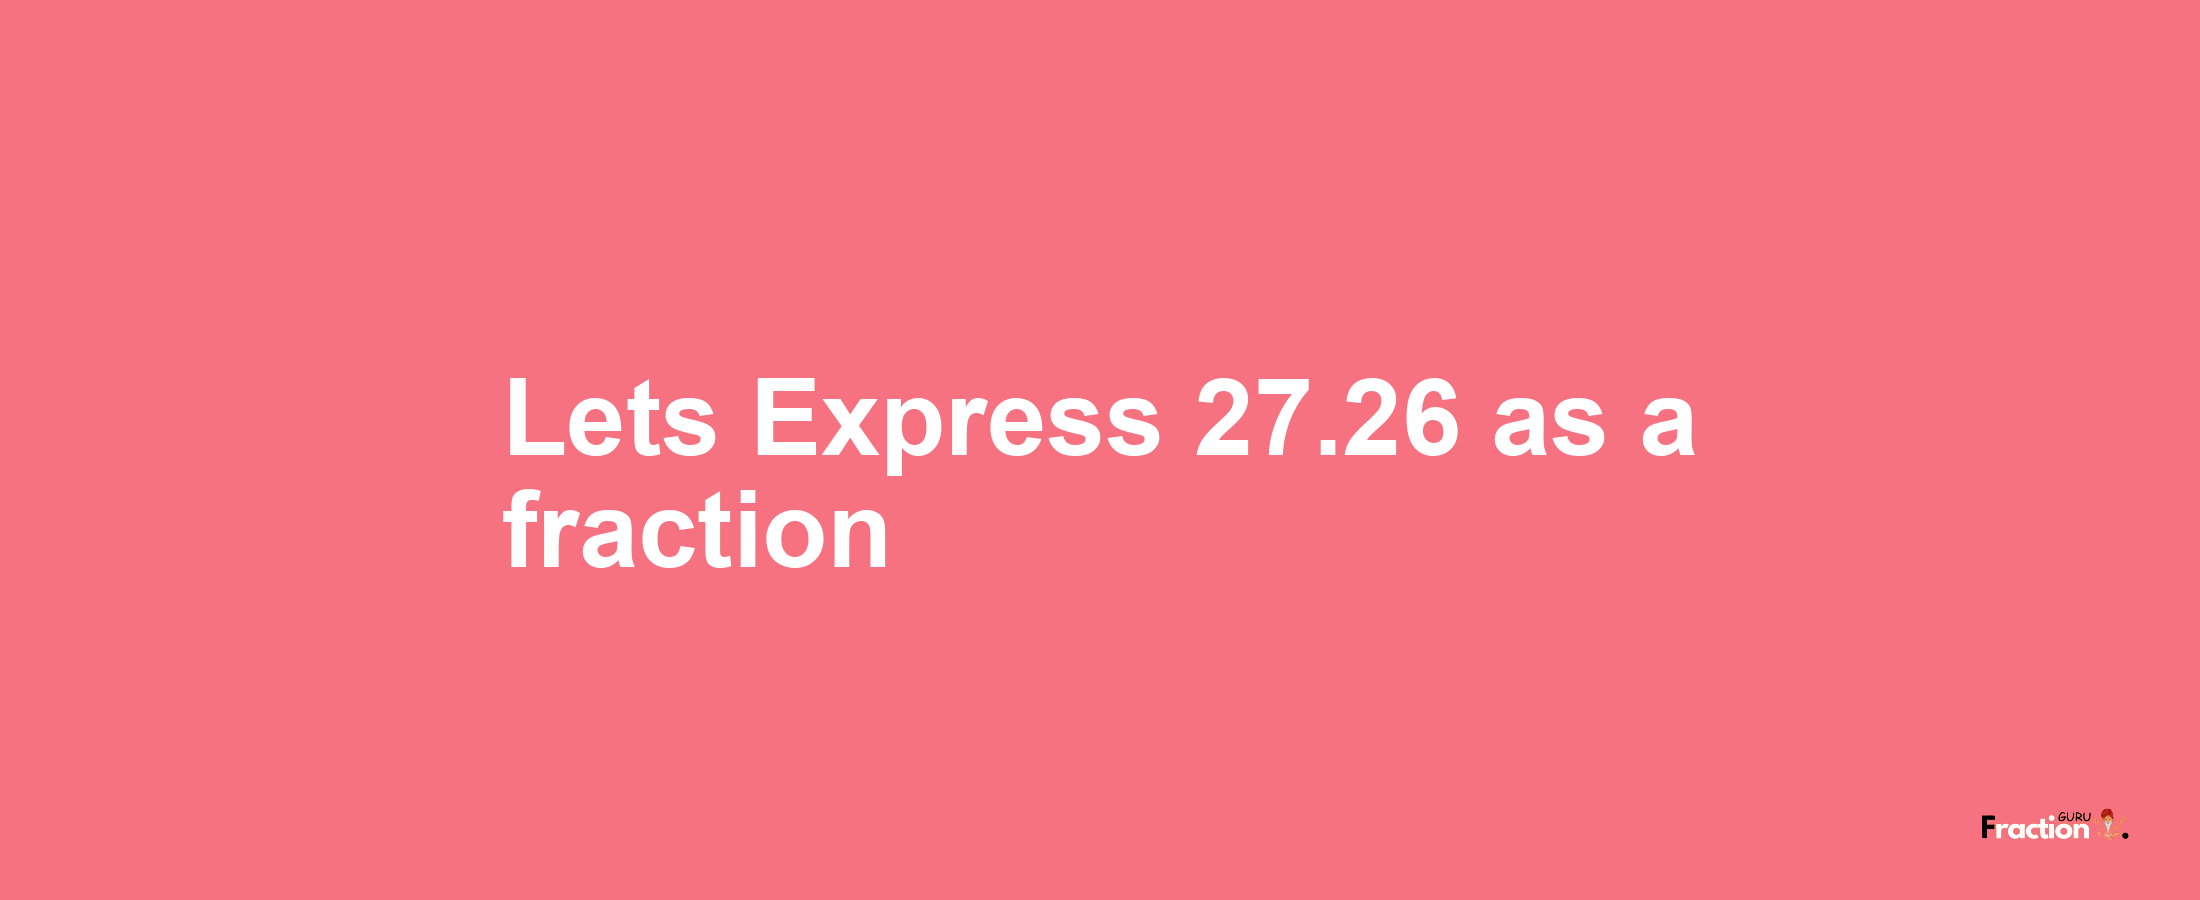 Lets Express 27.26 as afraction